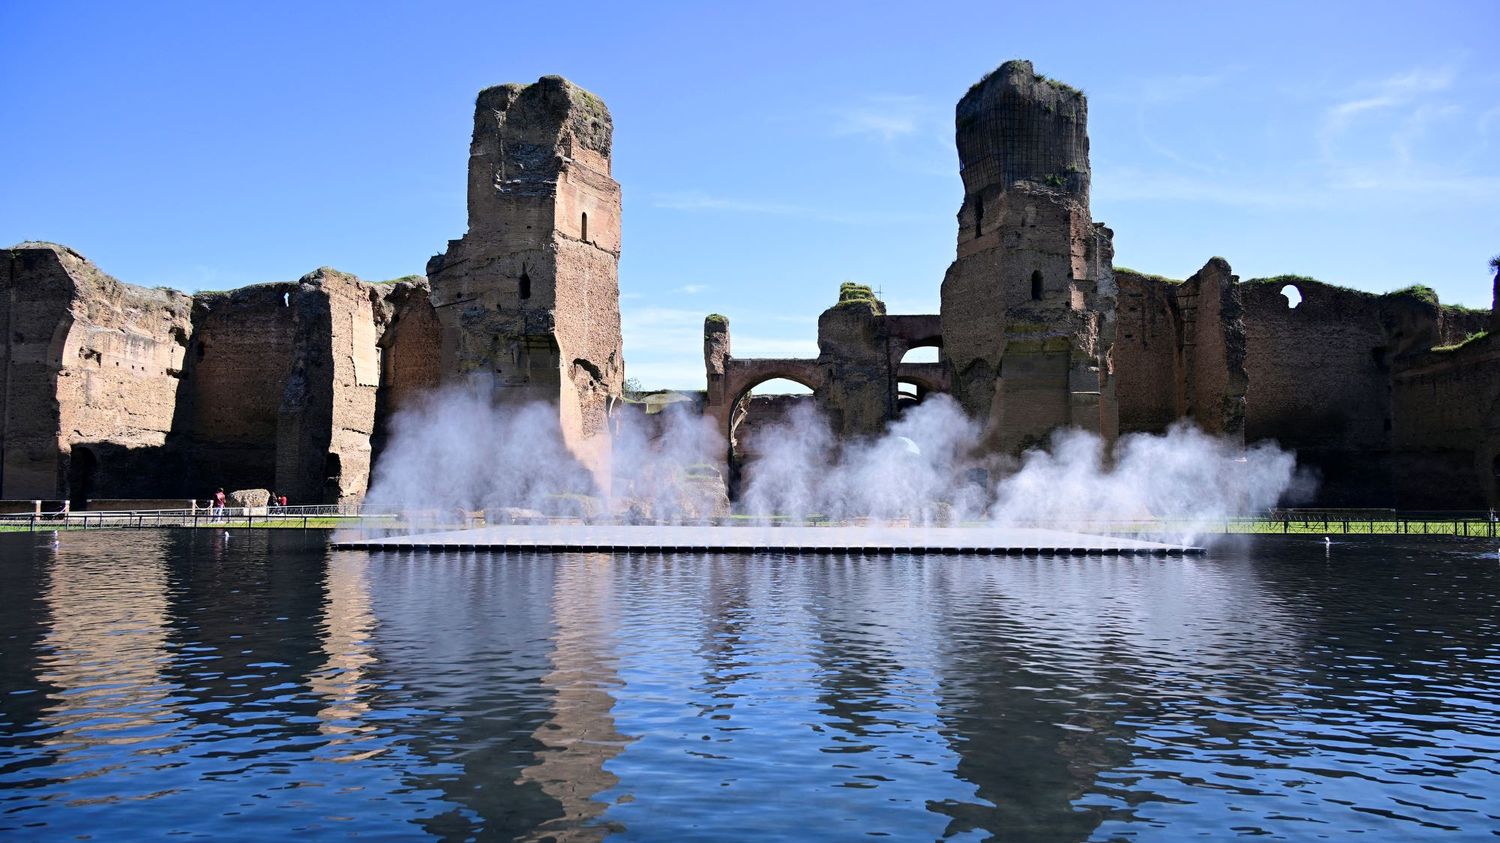 In Rome, a modern pool offers new reflections on the ancient Baths of Caracalla